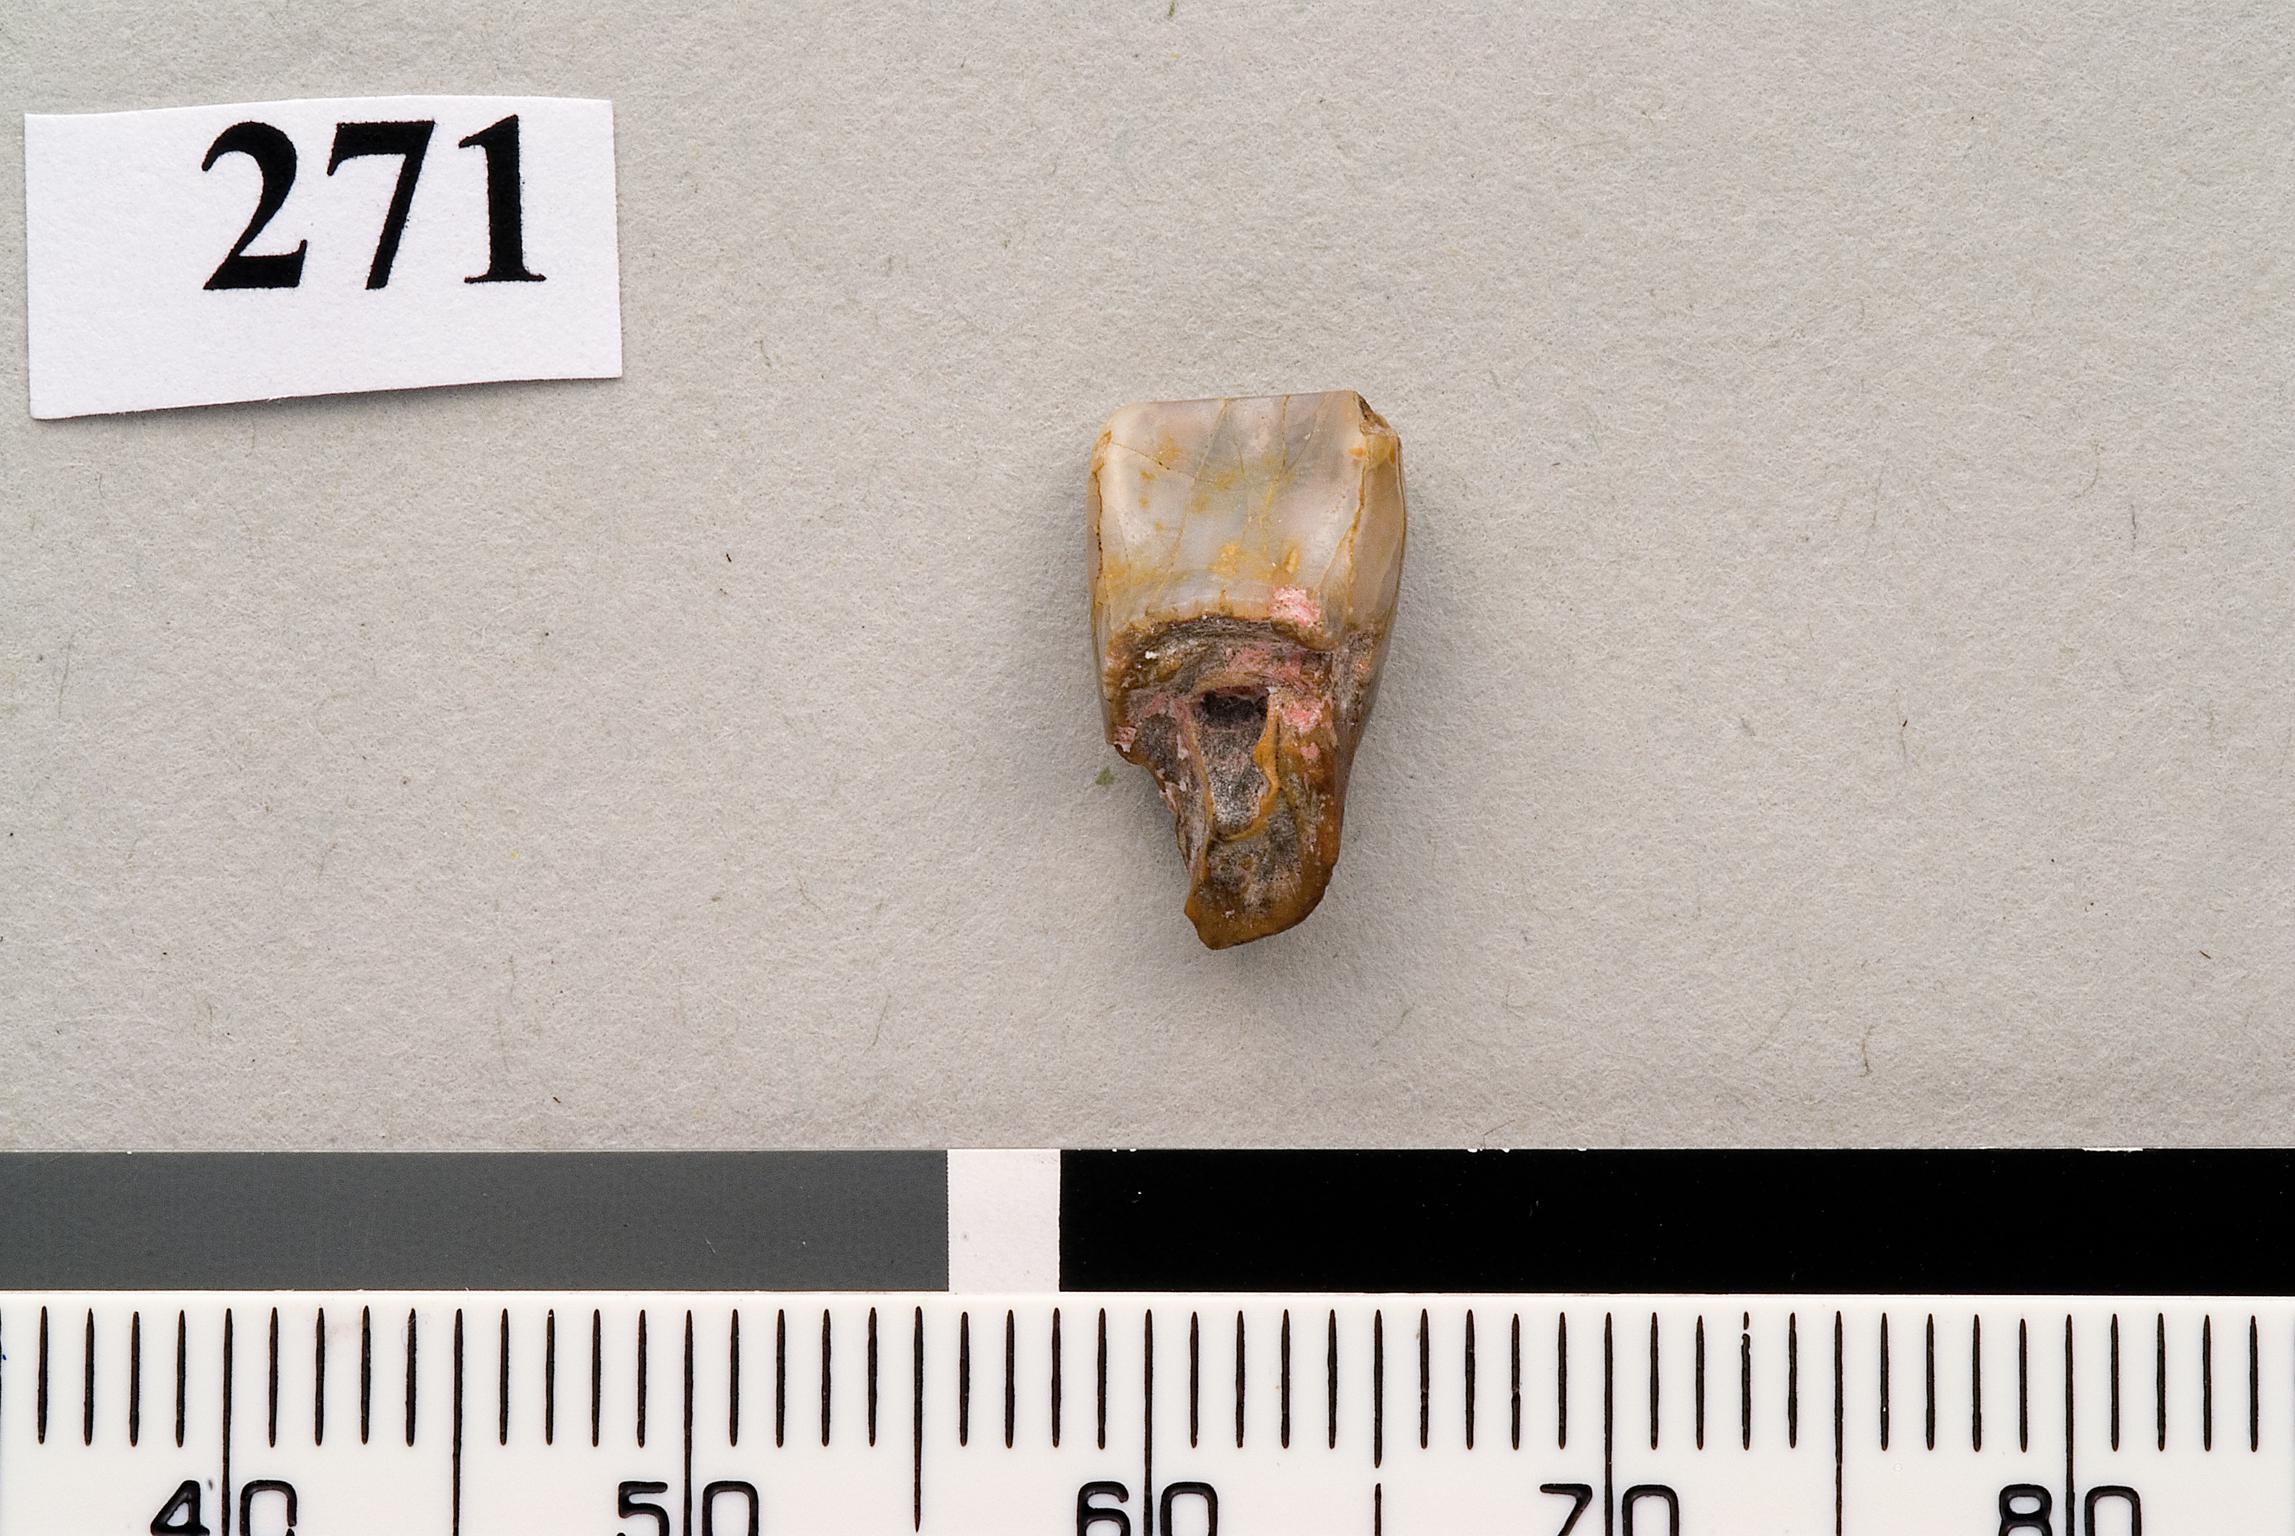 Lower Palaeolithic Neanderthal incisor